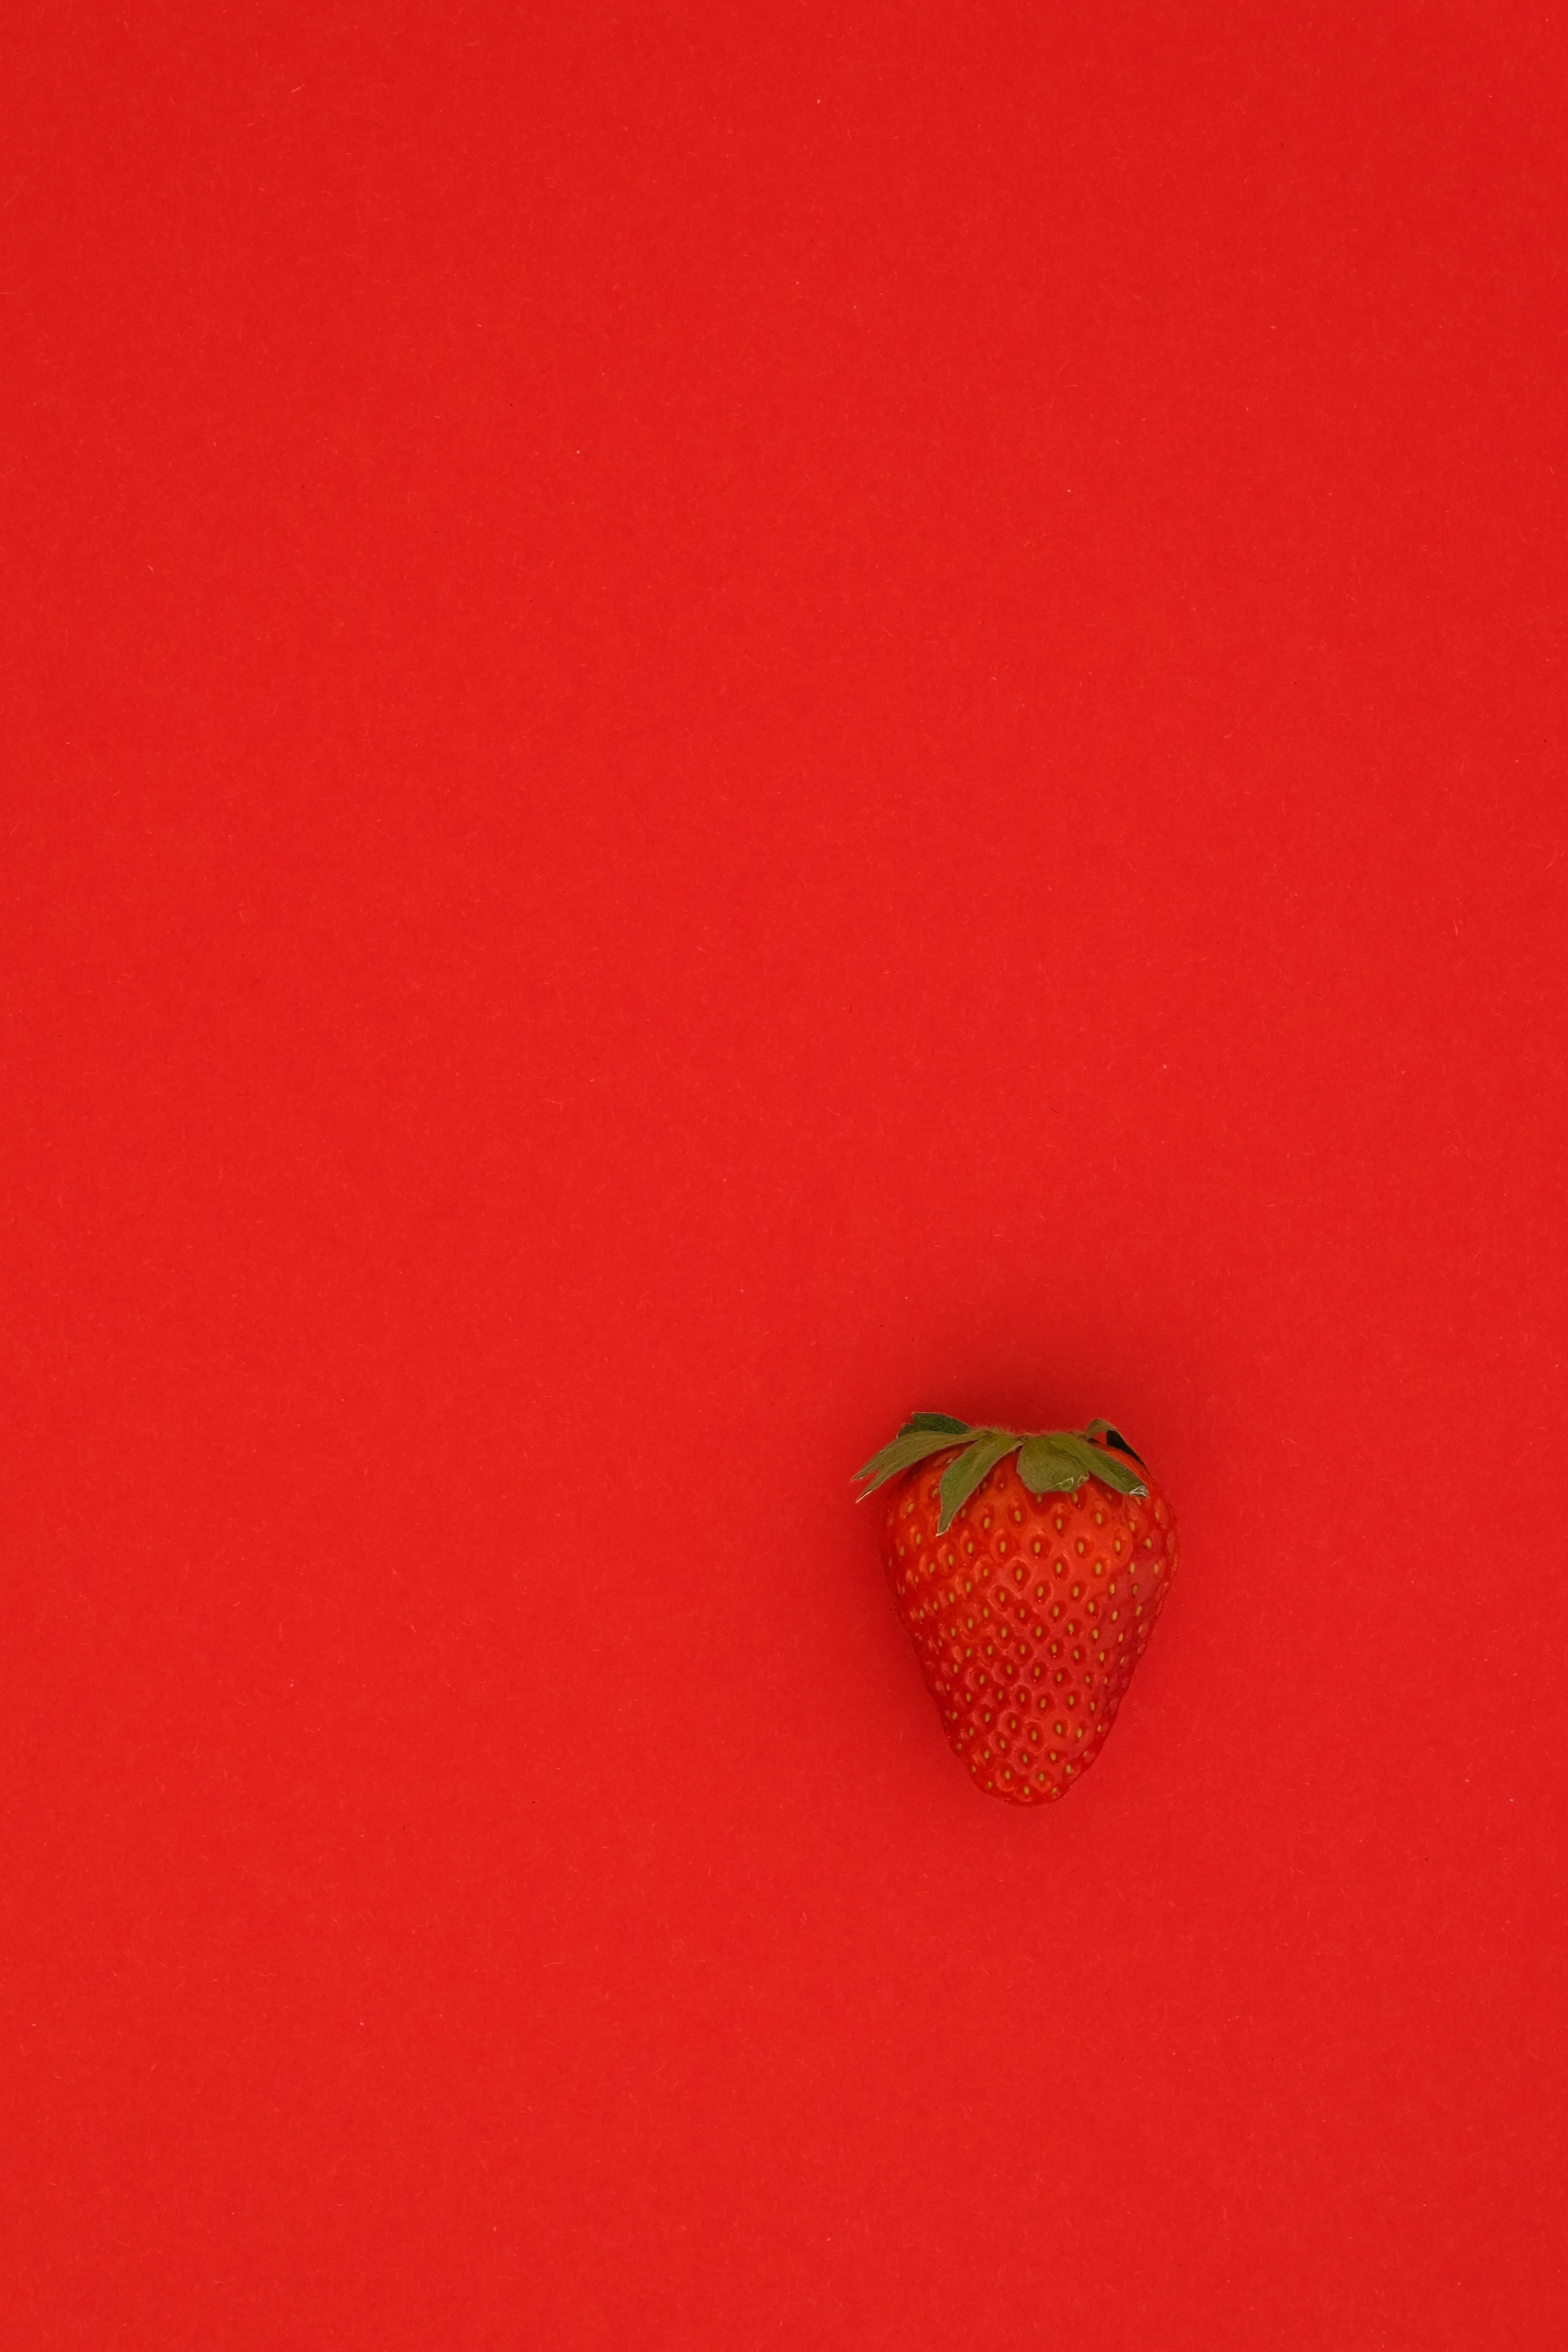 android strawberry, red background, berry, food